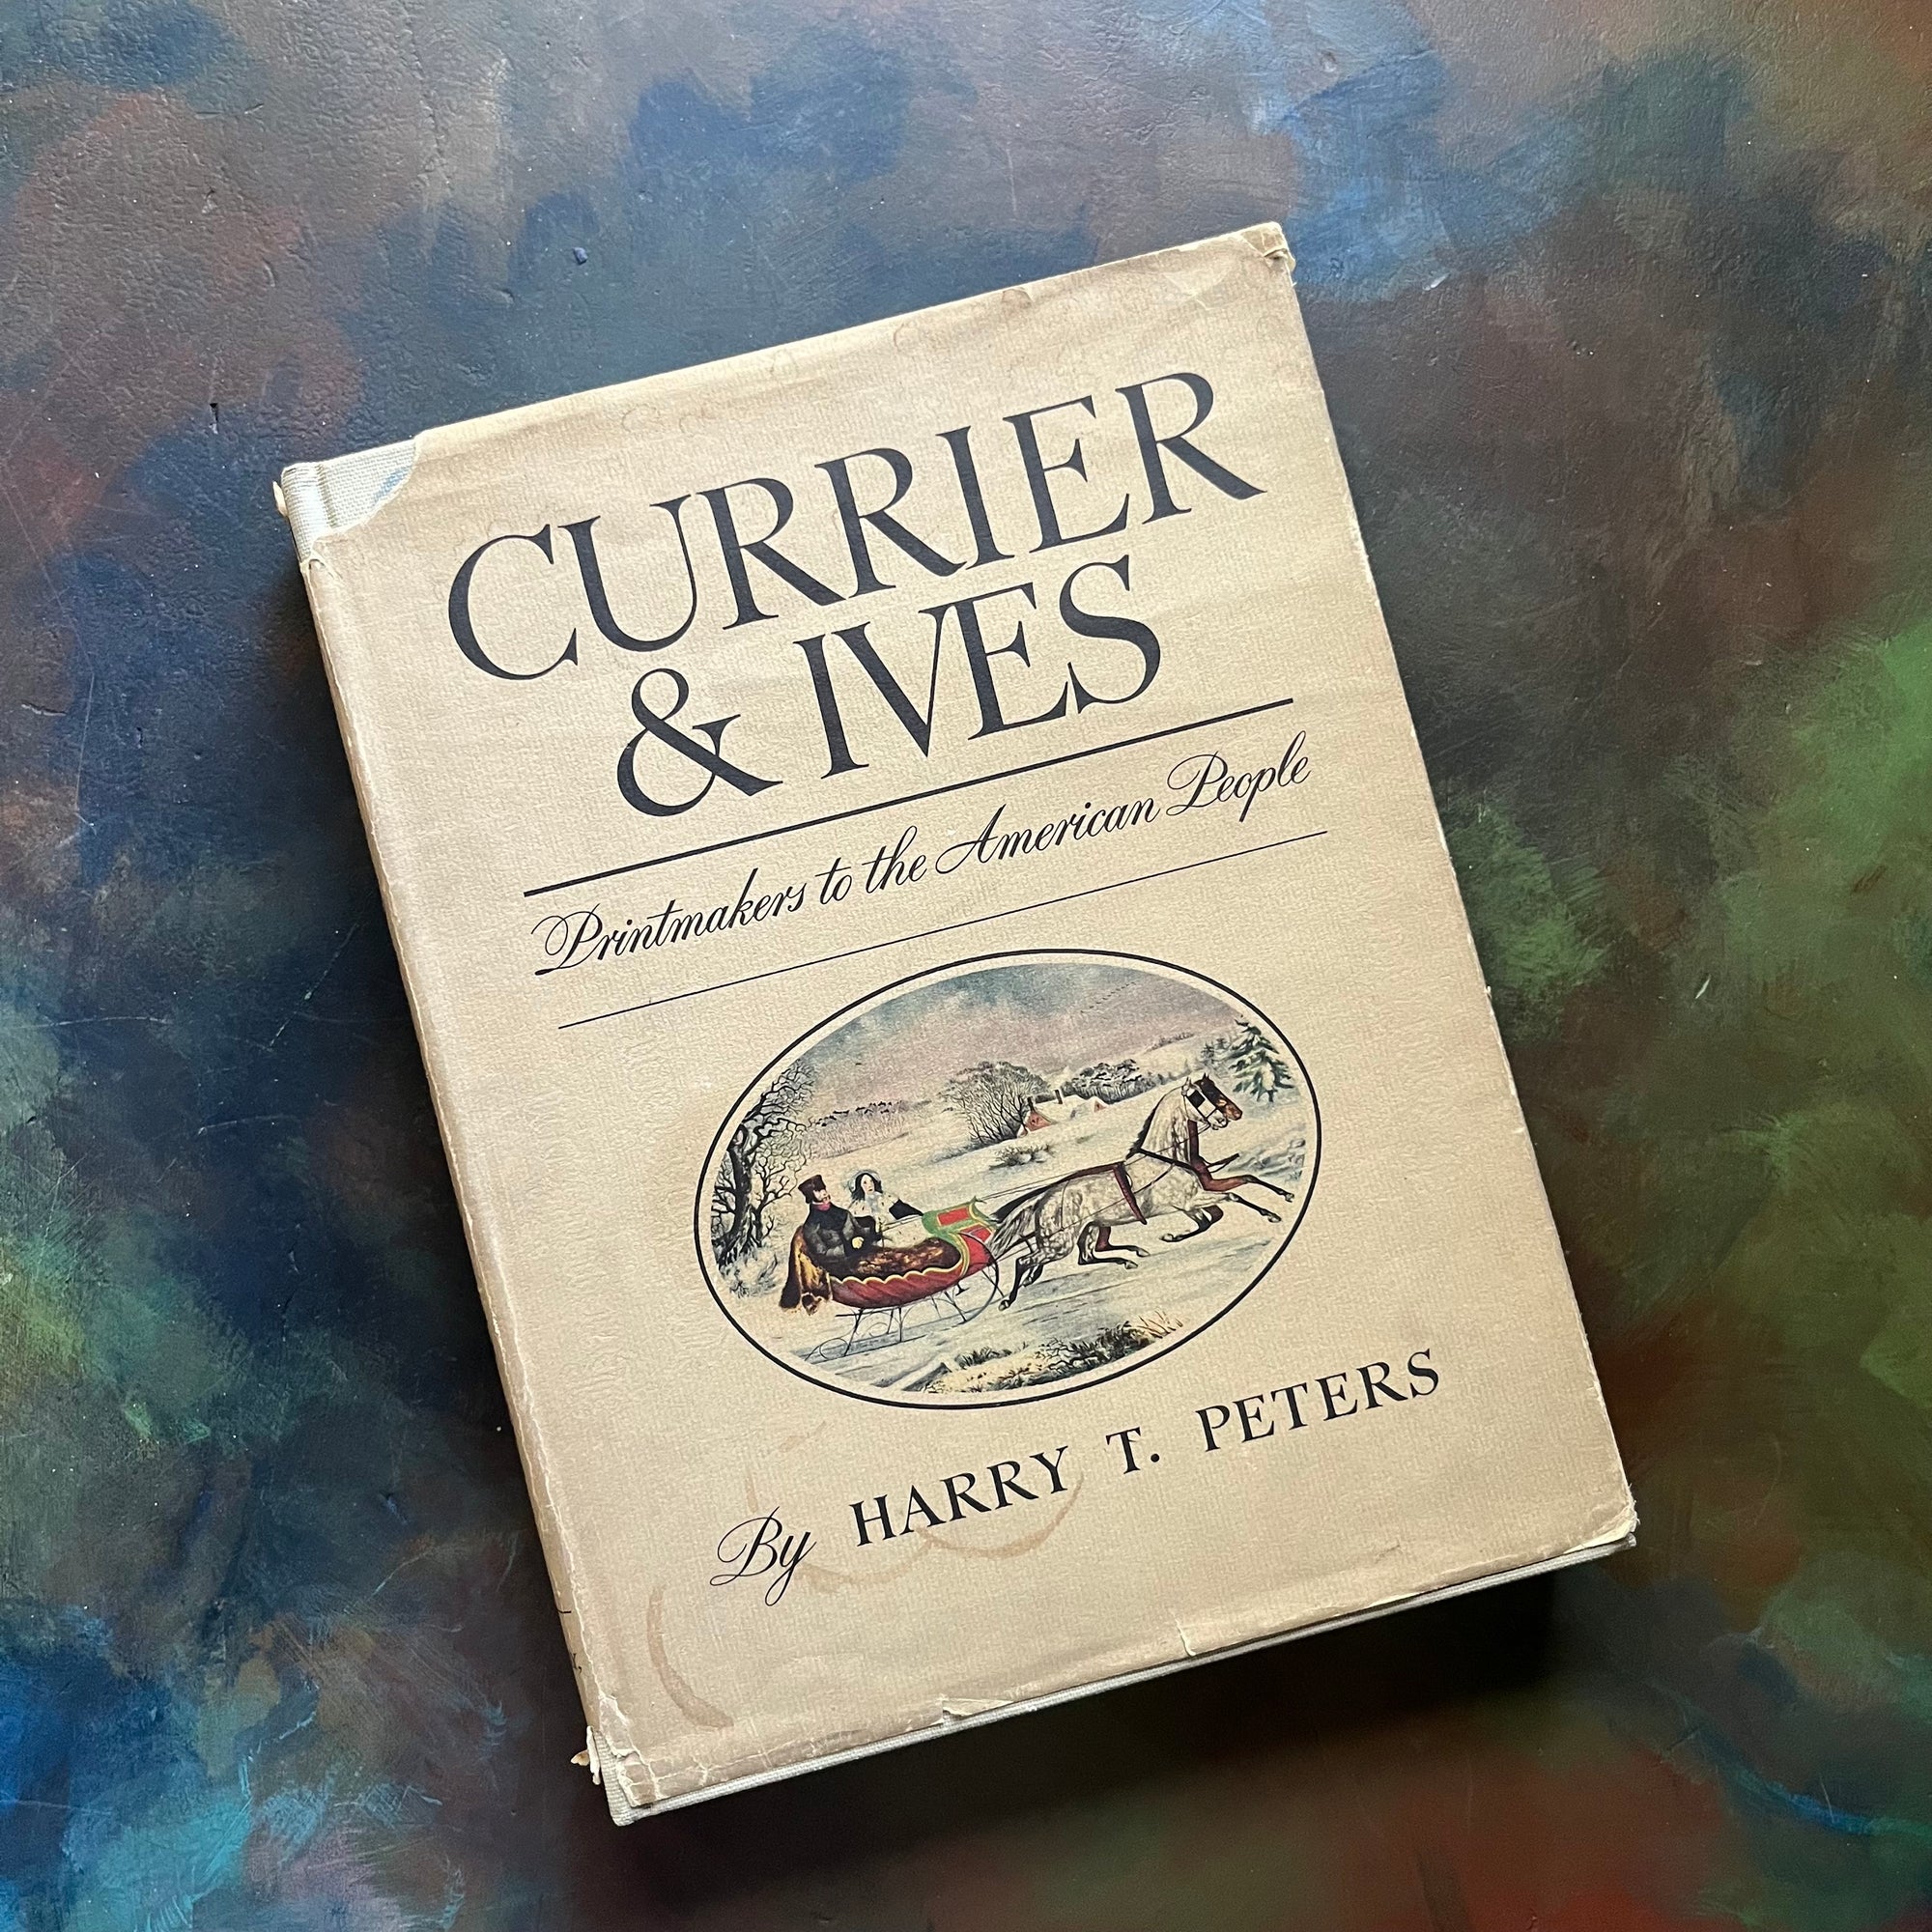 Currier & Ives Printmakers to the American People by Harry T. Peters-antique art books-antique prints-view of the dust jacket's front cover